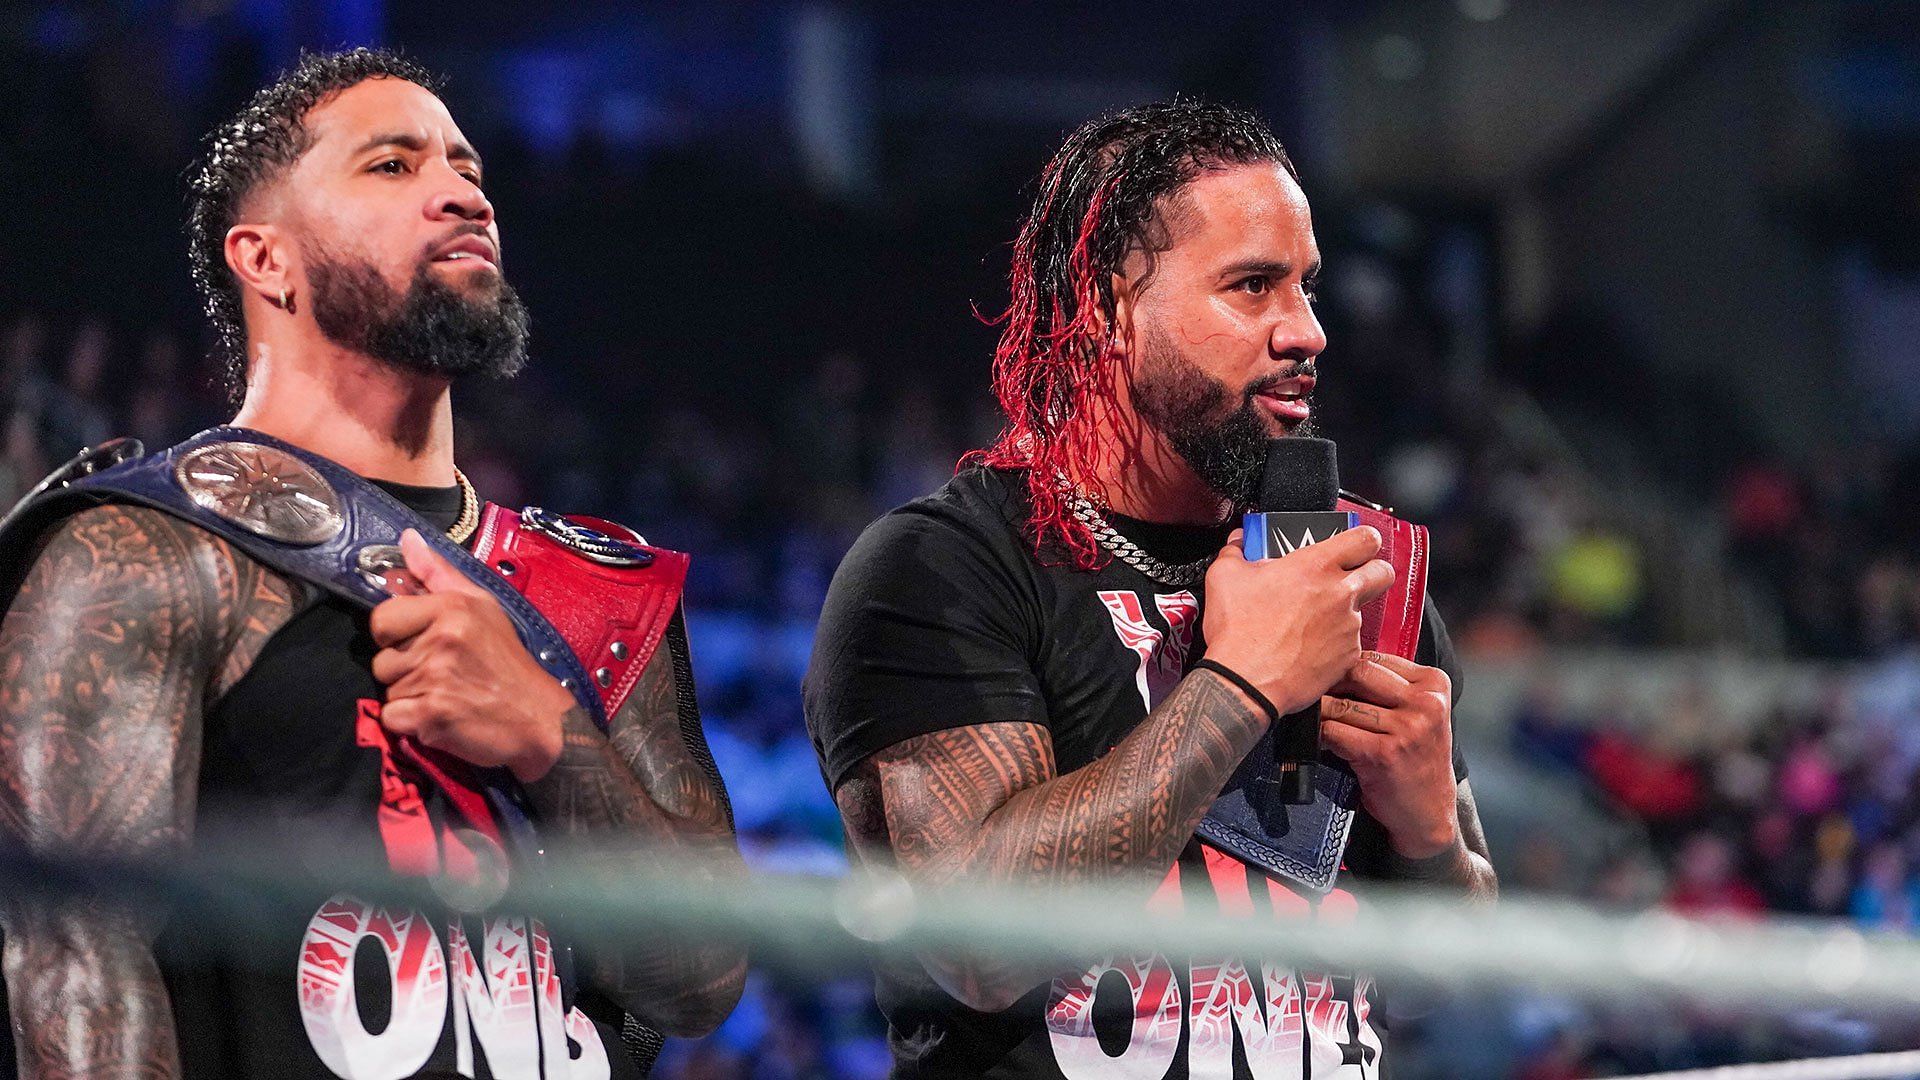 The Usos on SmackDown